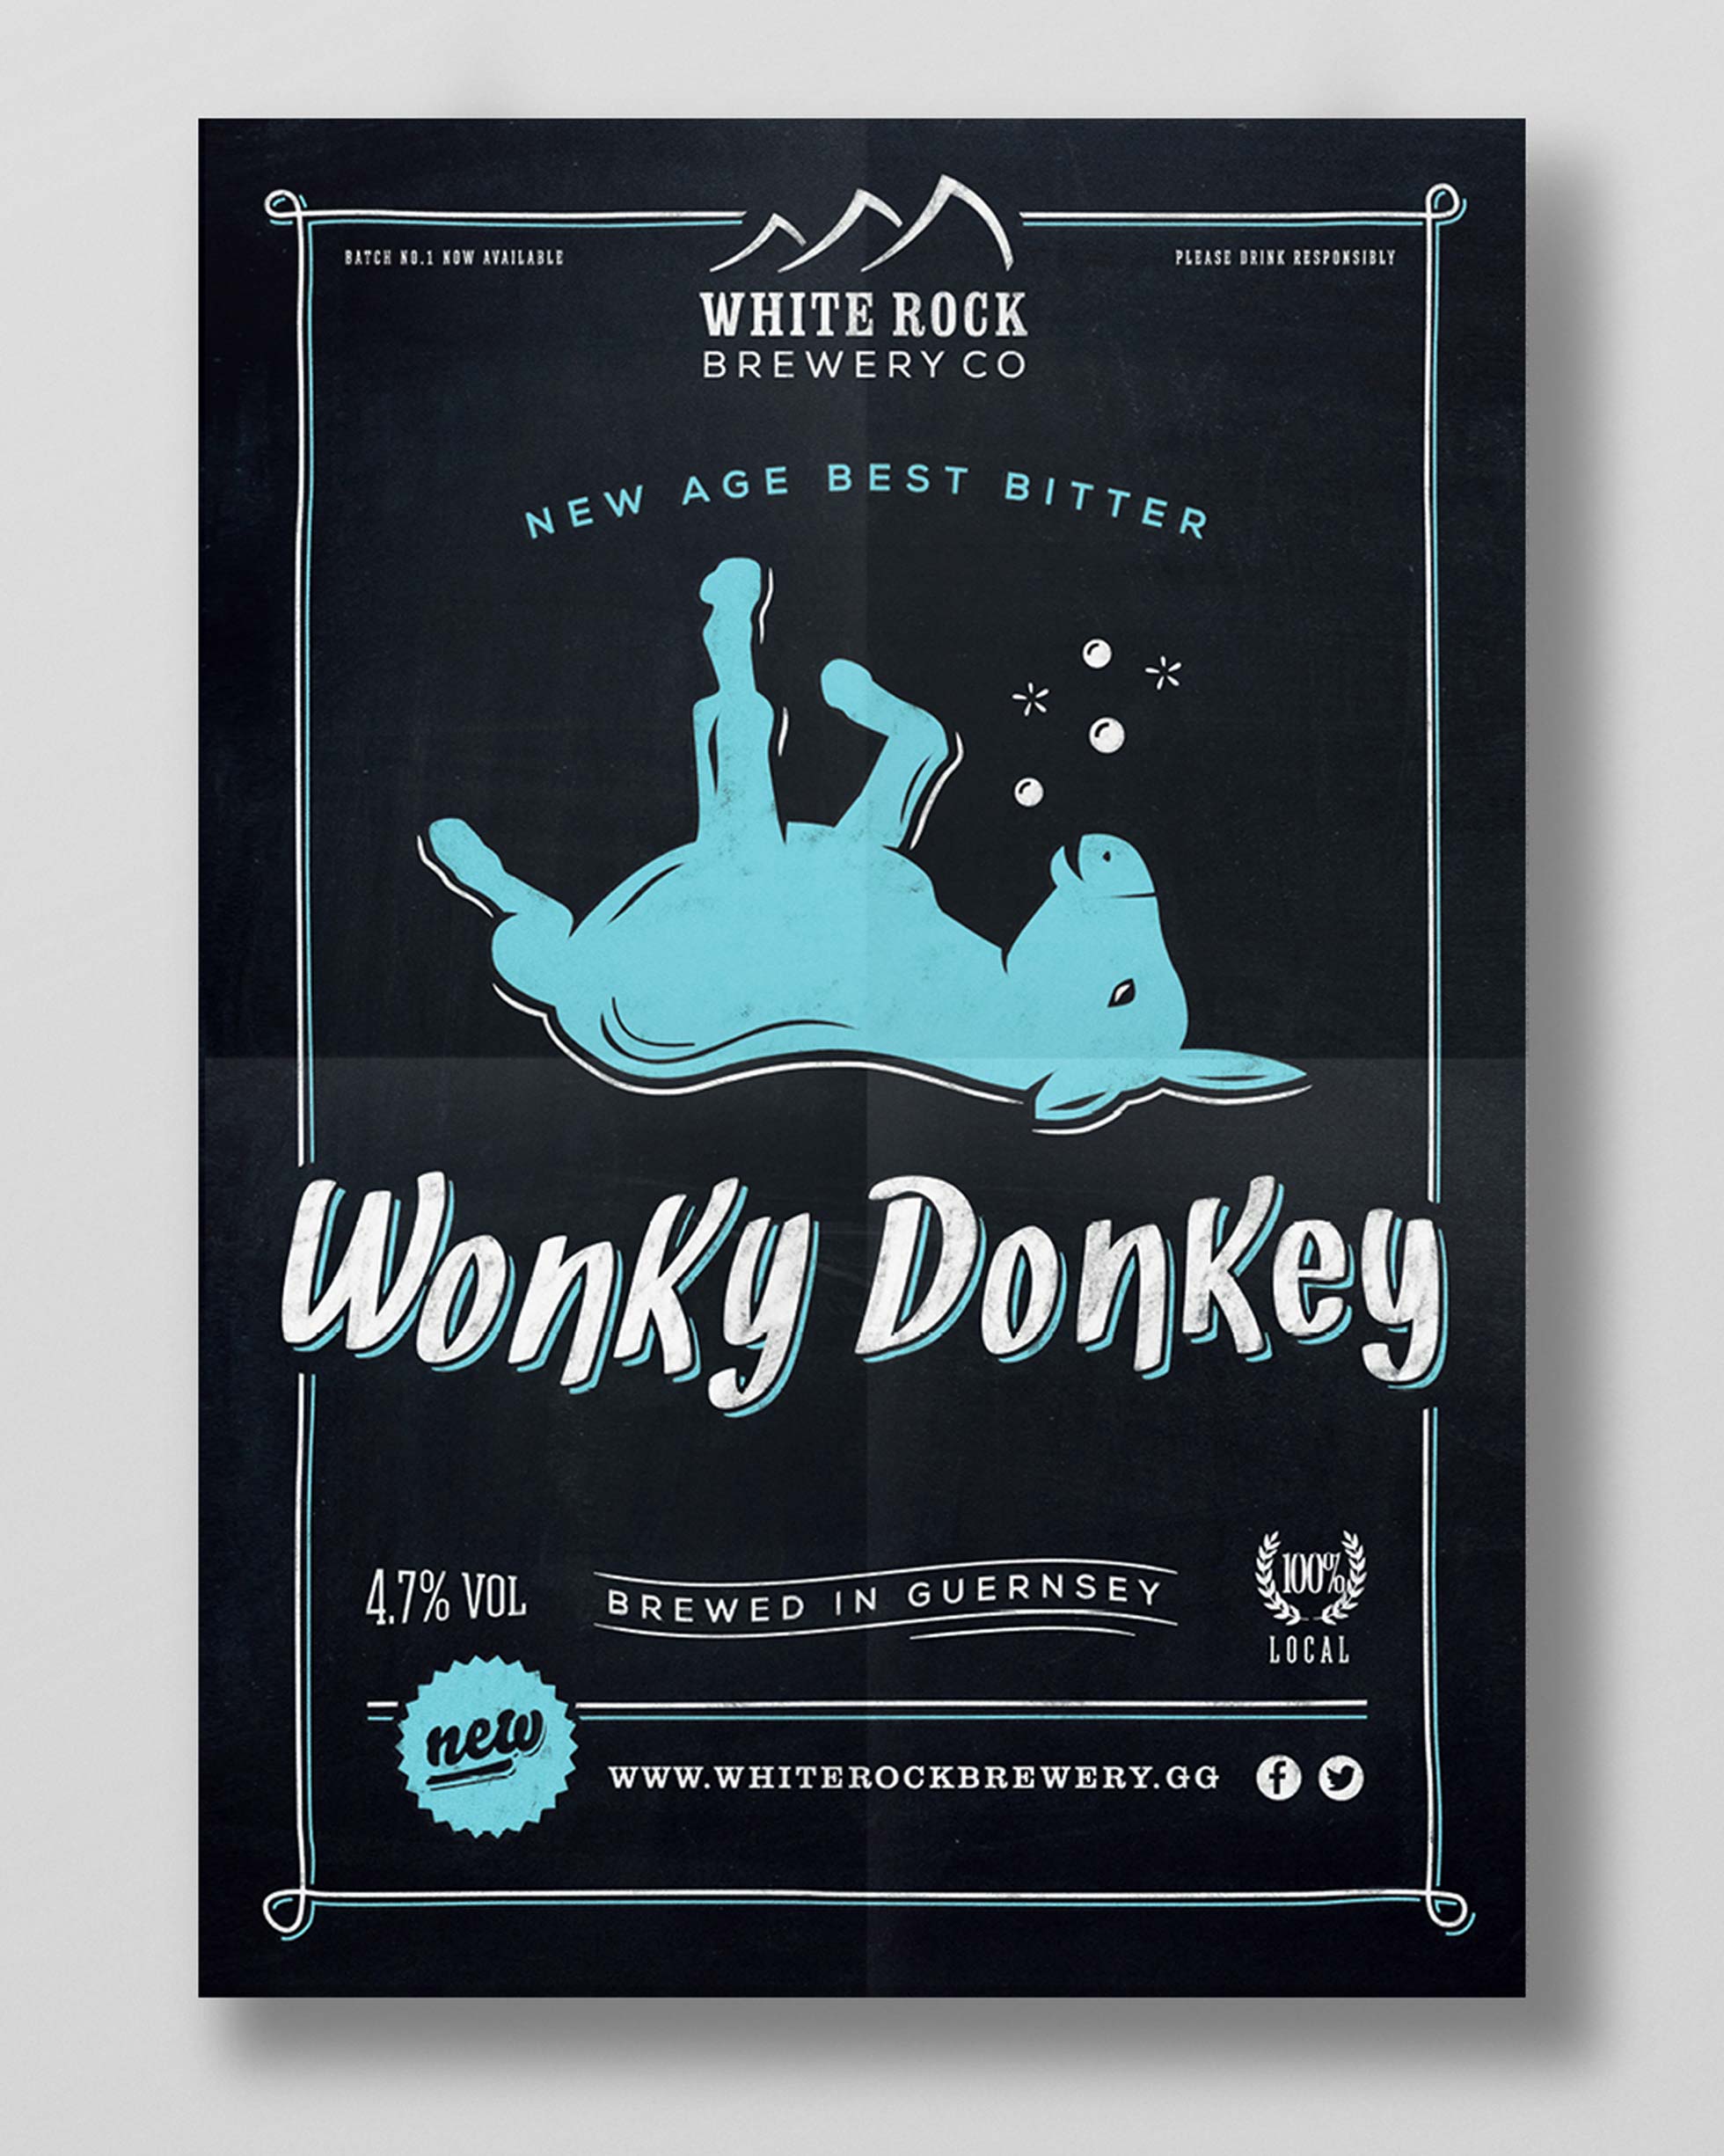 New age best bitter poster for Wonky Donkey